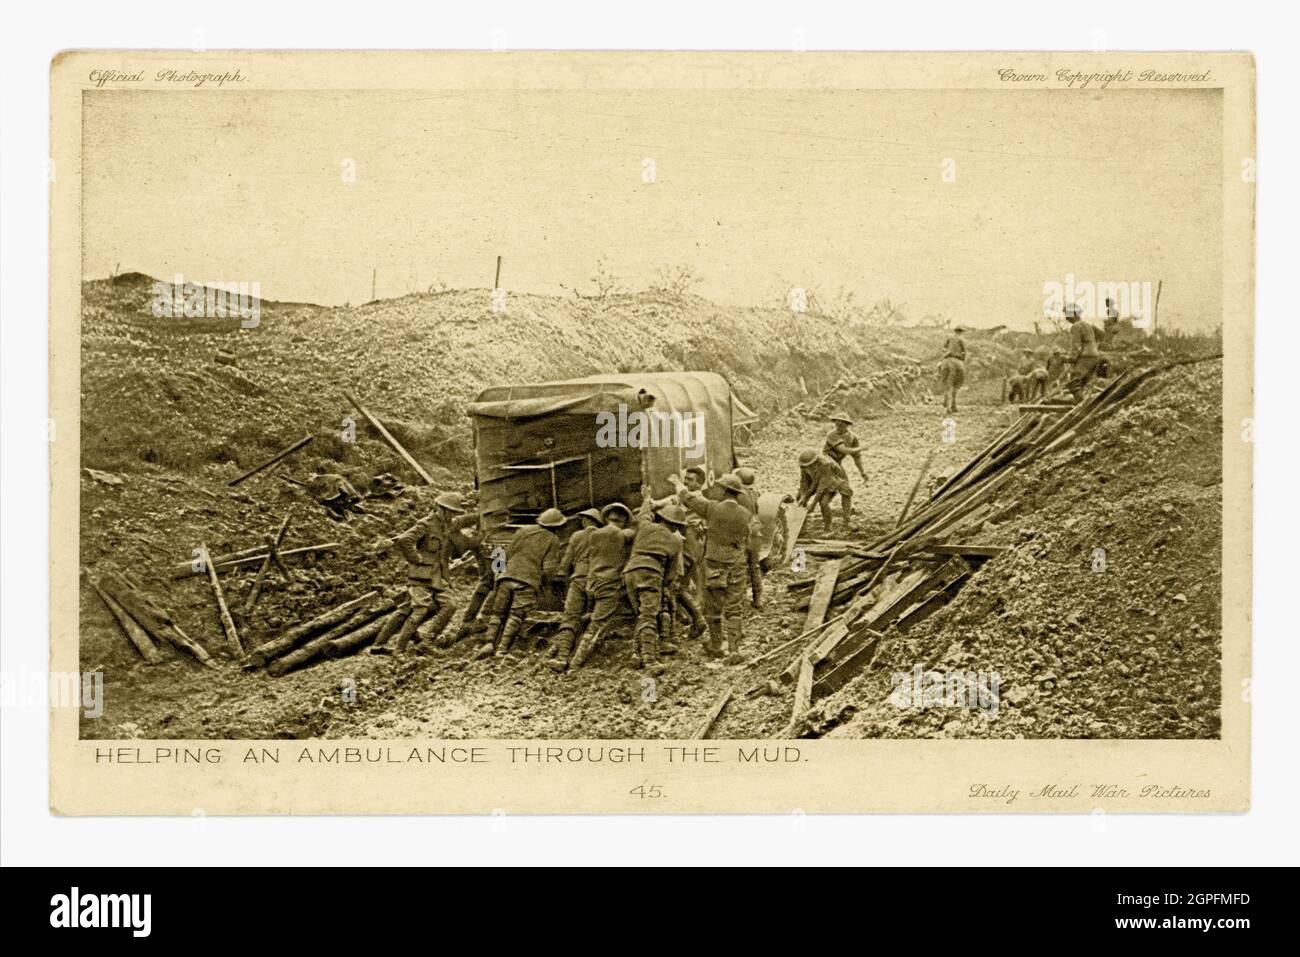 Original WW1 era Daily Mail War Pictures postcard of soldiers helping push an ambulance belonging to the 16th (Irish) Division through the mud in Mametz Wood, Battle of the Somme, France, July 1916. Official War Photographs series. Printed in England. Stock Photo